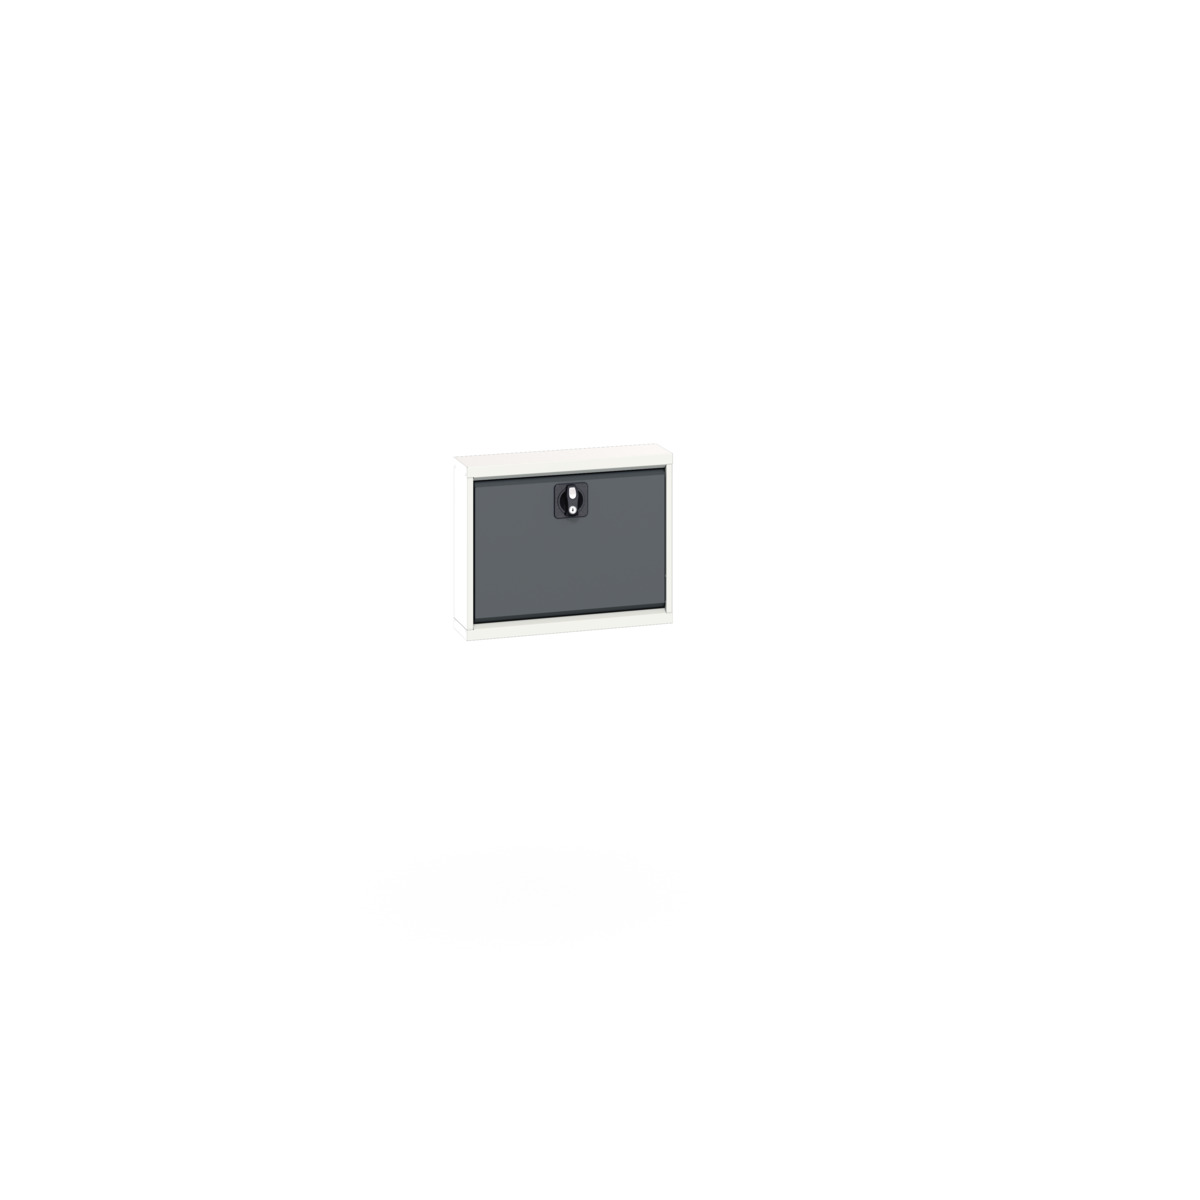 16912350. - verso wall mounted laptop holder